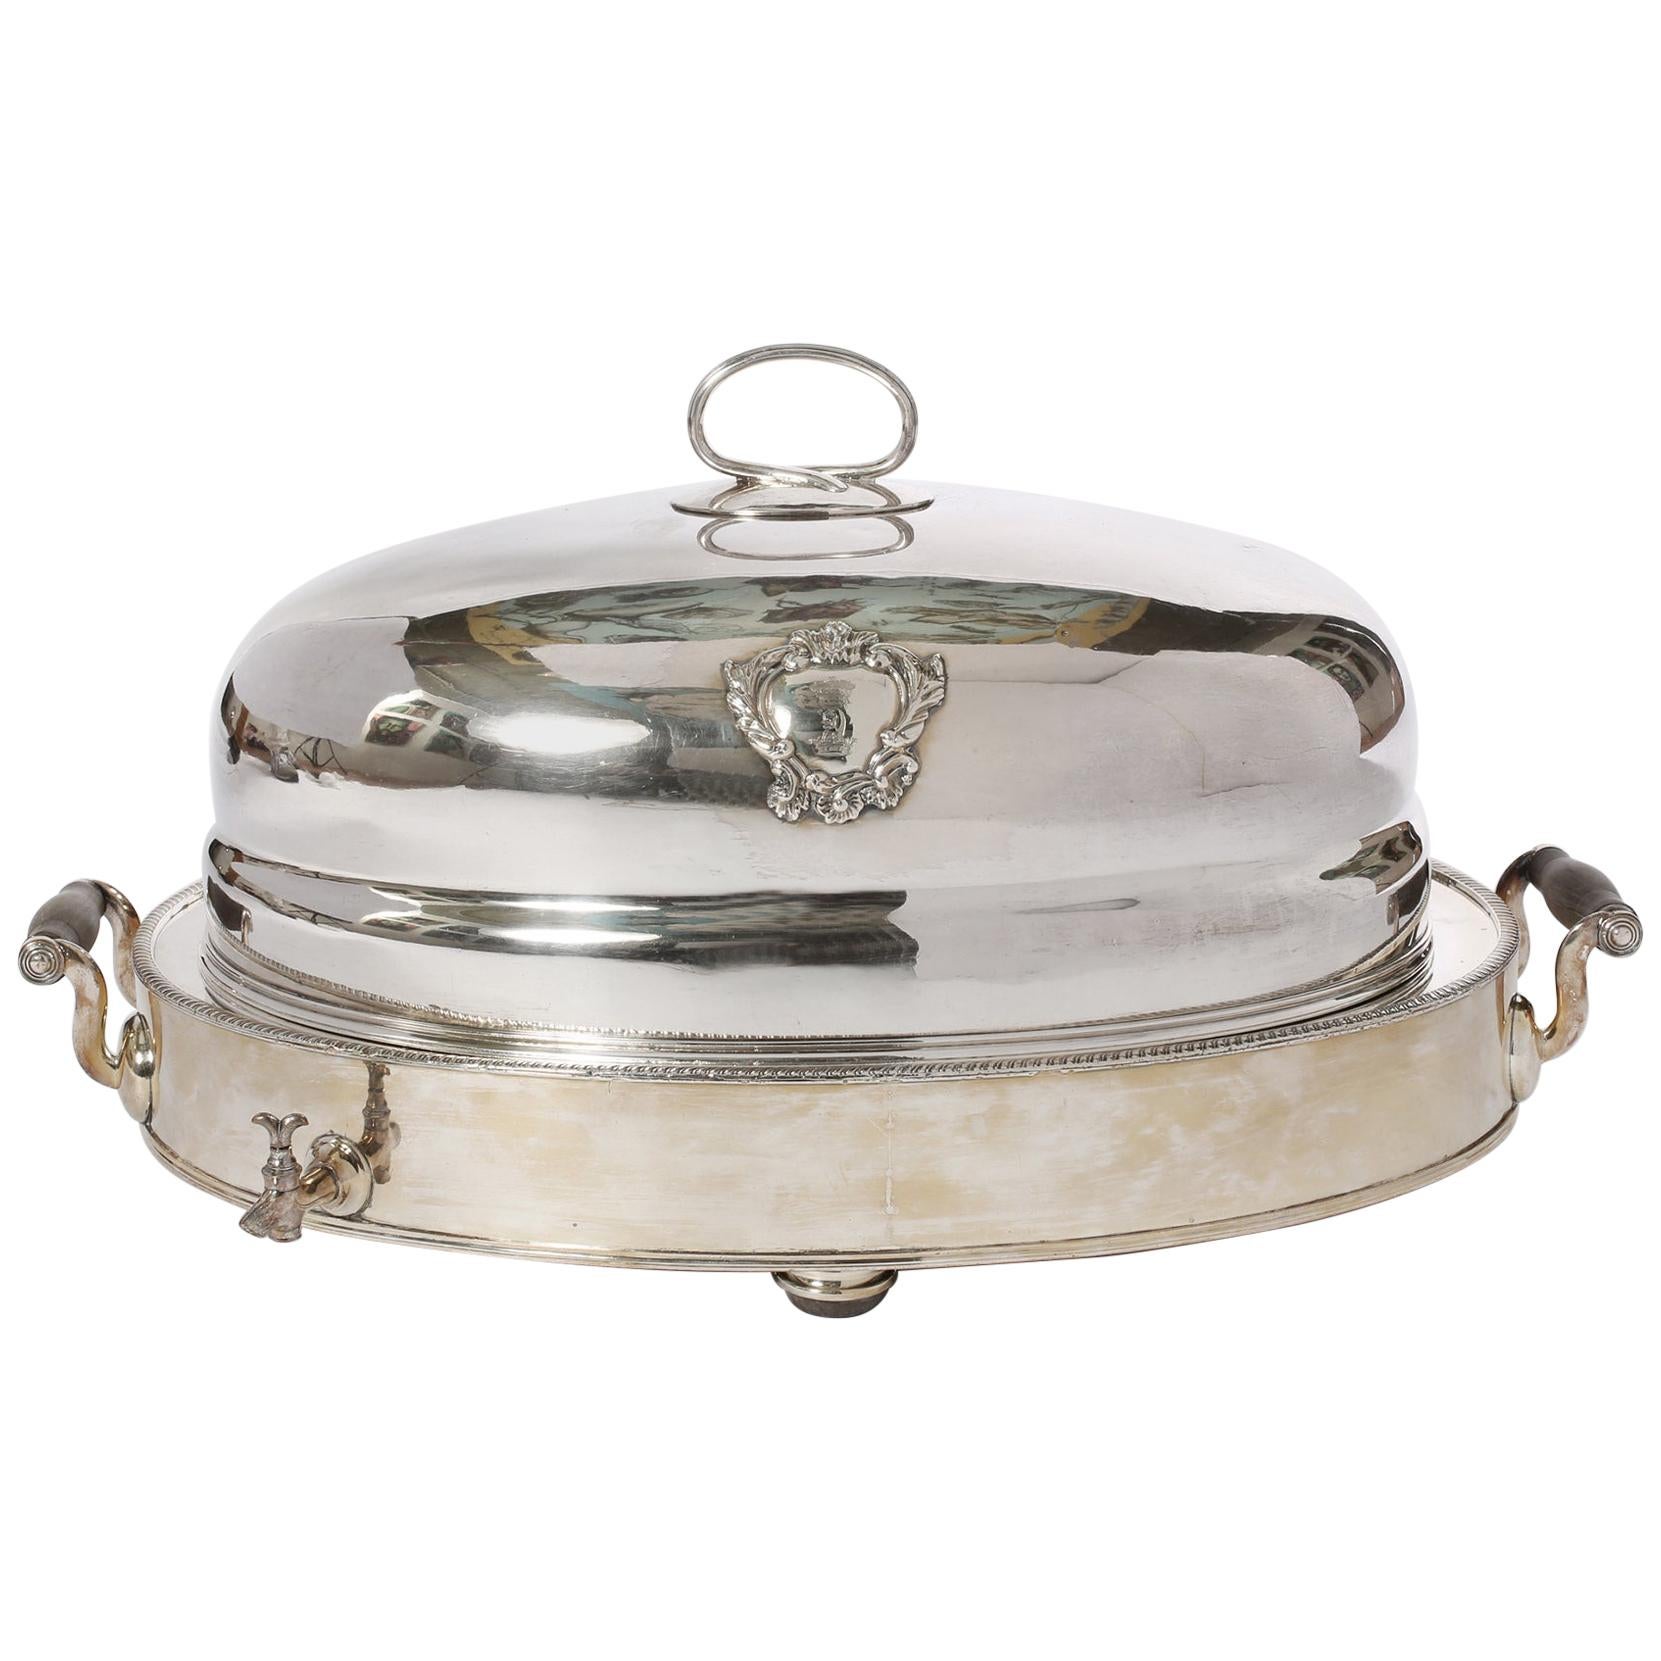 English Sheffield Silver Plated Meat Dome Service Set